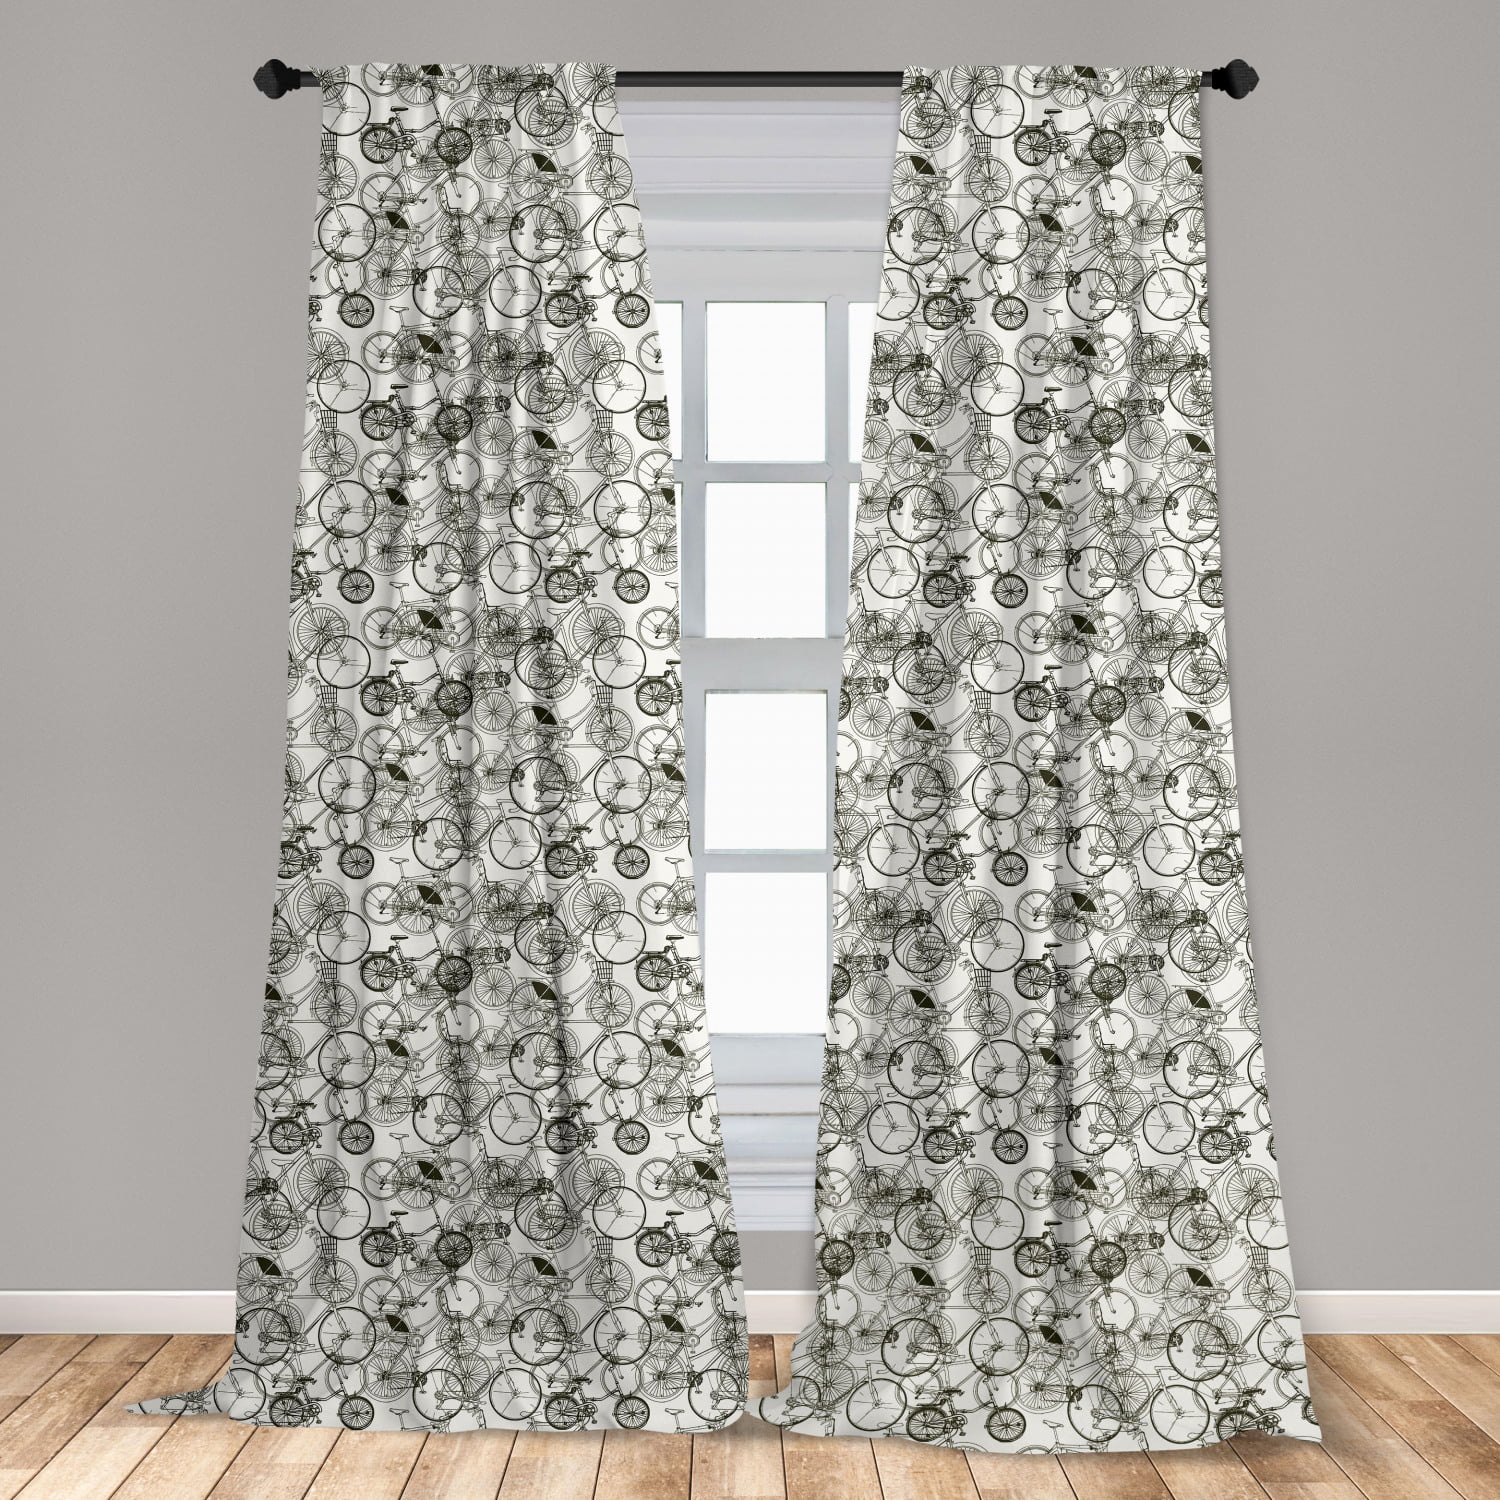 Sketchy Curtains Vintage Retro Bicycle Window Drapes 2 Panel Set 108x108 Inch 